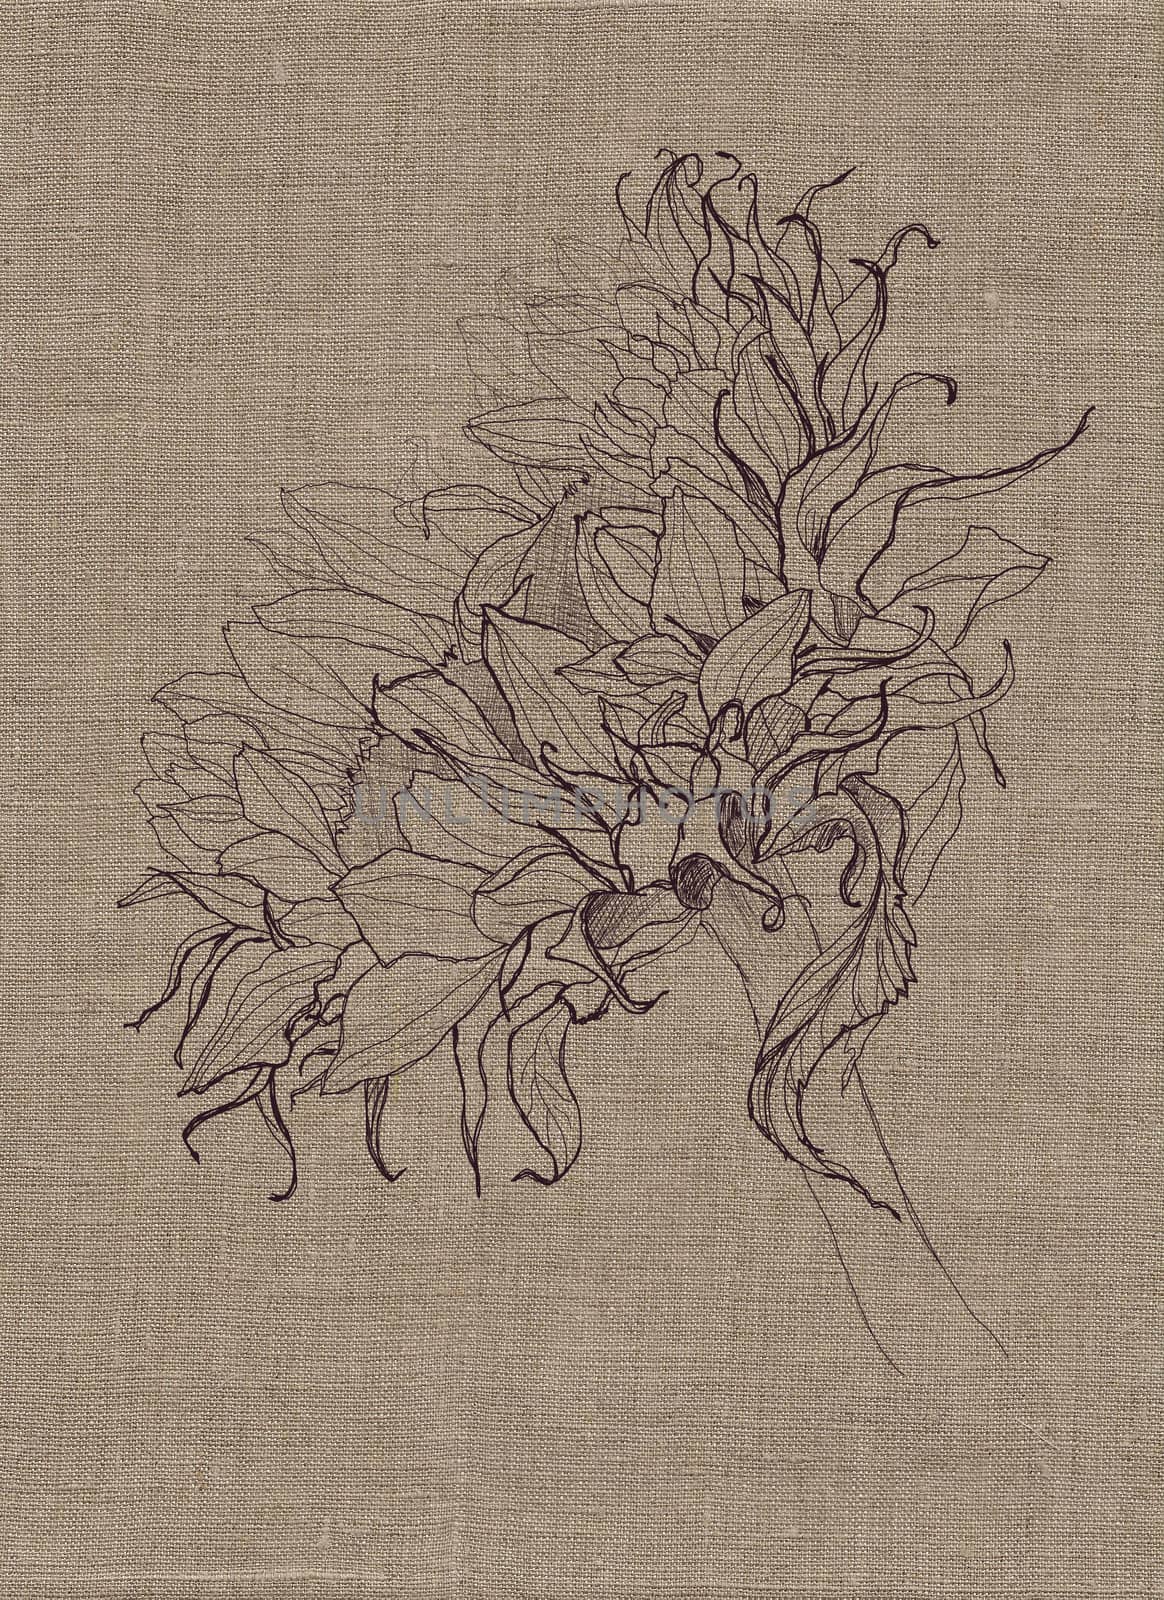 sunflower drawing on linen background by vergasova